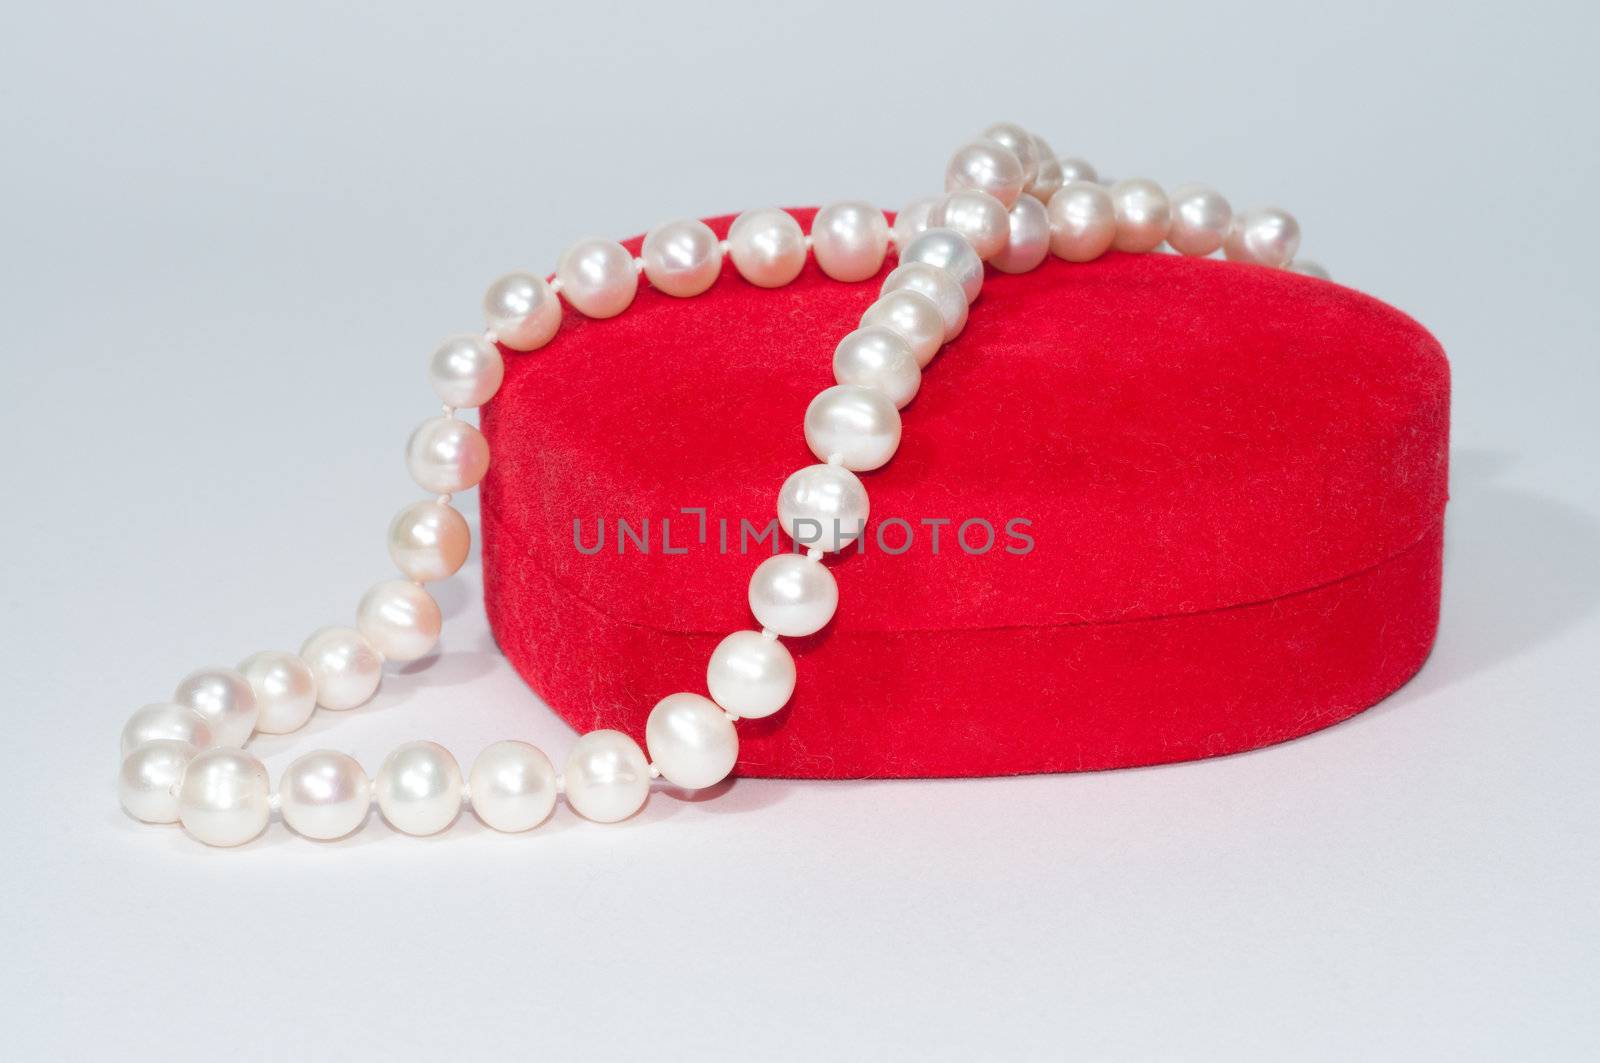 String of pearls on red velvet box  by Erchog